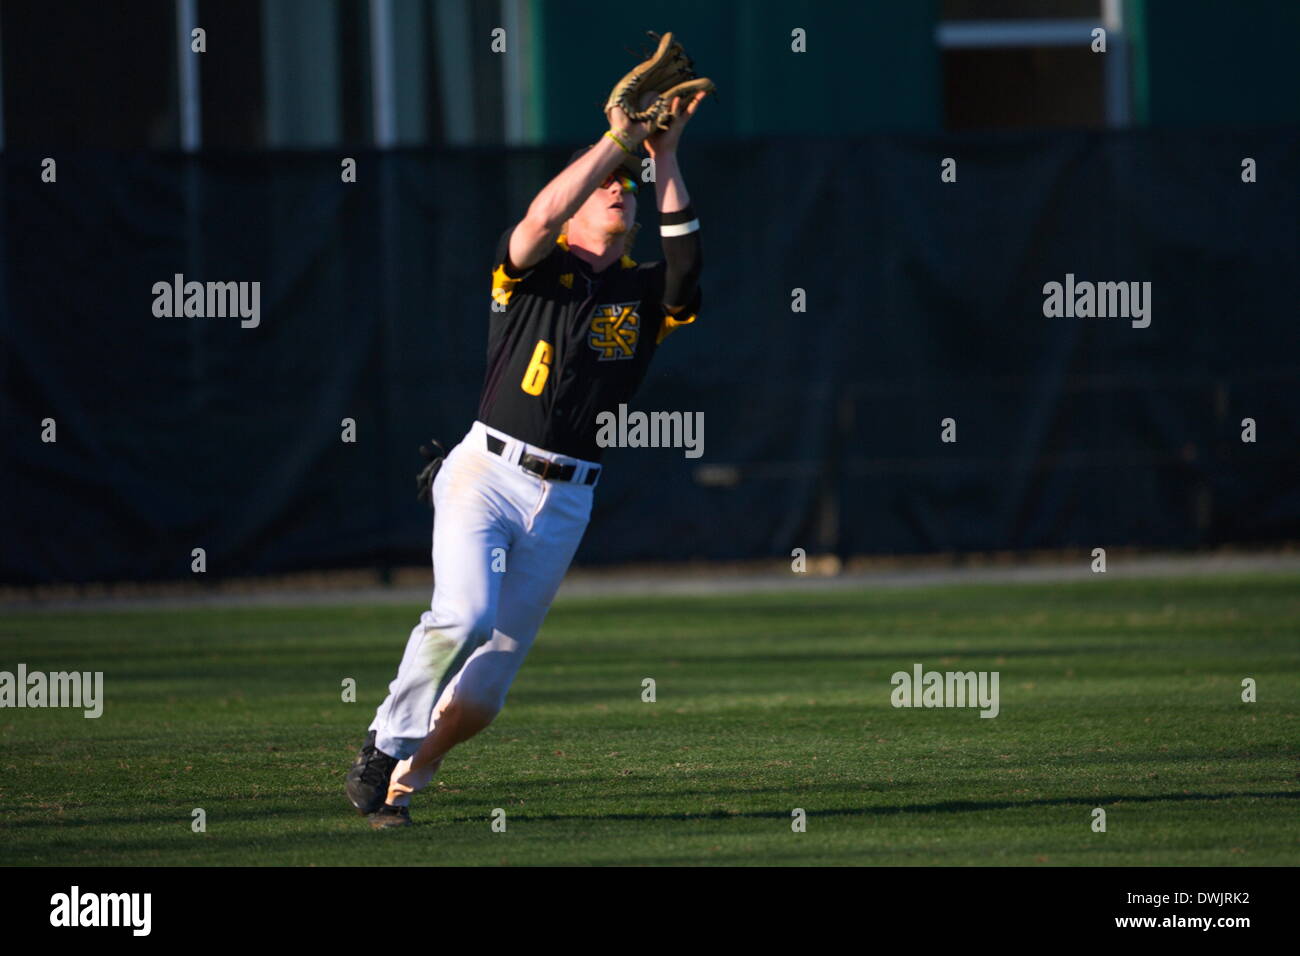 Kennesaw, Georgia, USA.  March 8, 2014 -- Jacob Bruce (6) hauls in a fly ball during Saturday's doubleheader between Columbia University and Kennesaw State University.  The teams split the doubleheader.  Columbia one the first game 9-3.  KSU won the night cap 15-1. Credit:  Wayne Hughes | Alamy Live News Stock Photo